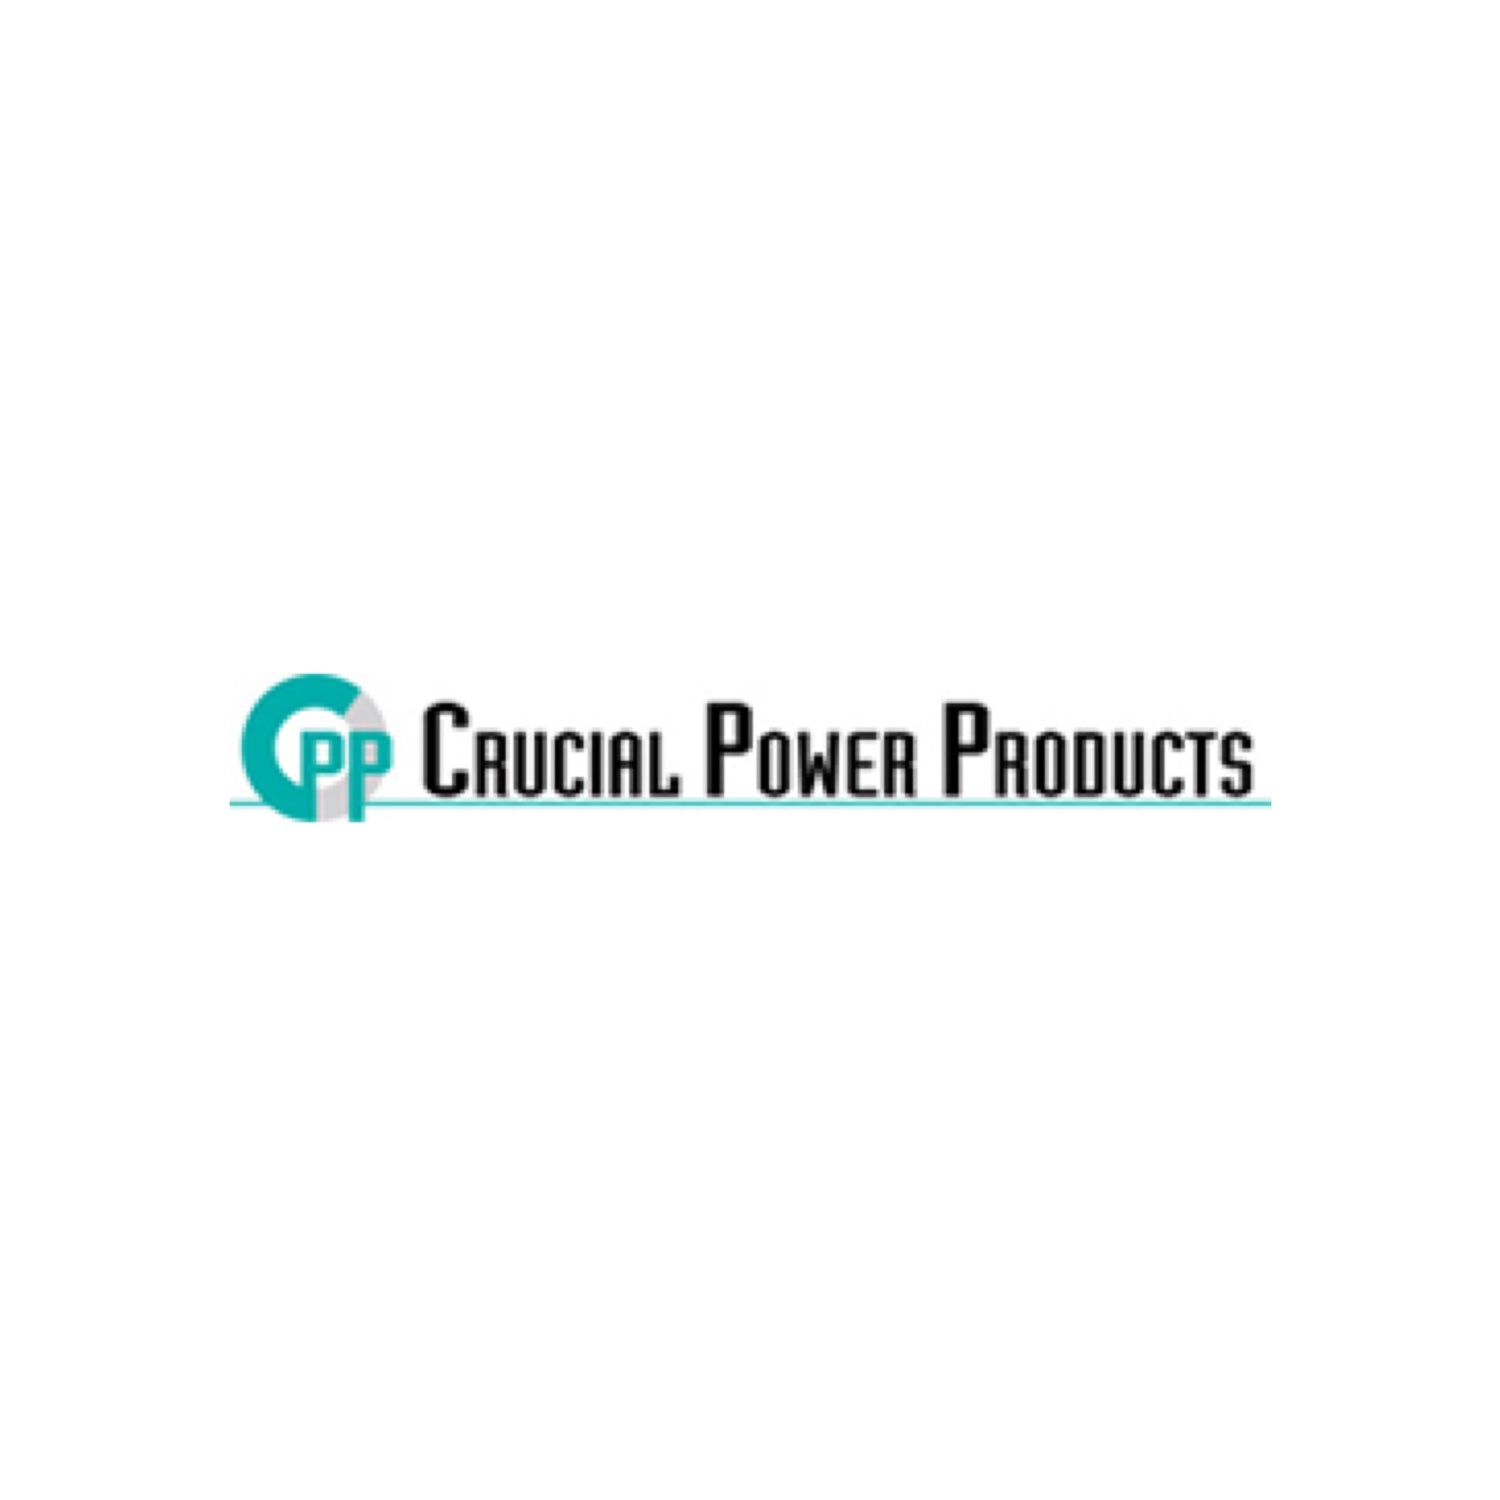 CRUCIAL POWER PRODUCTS